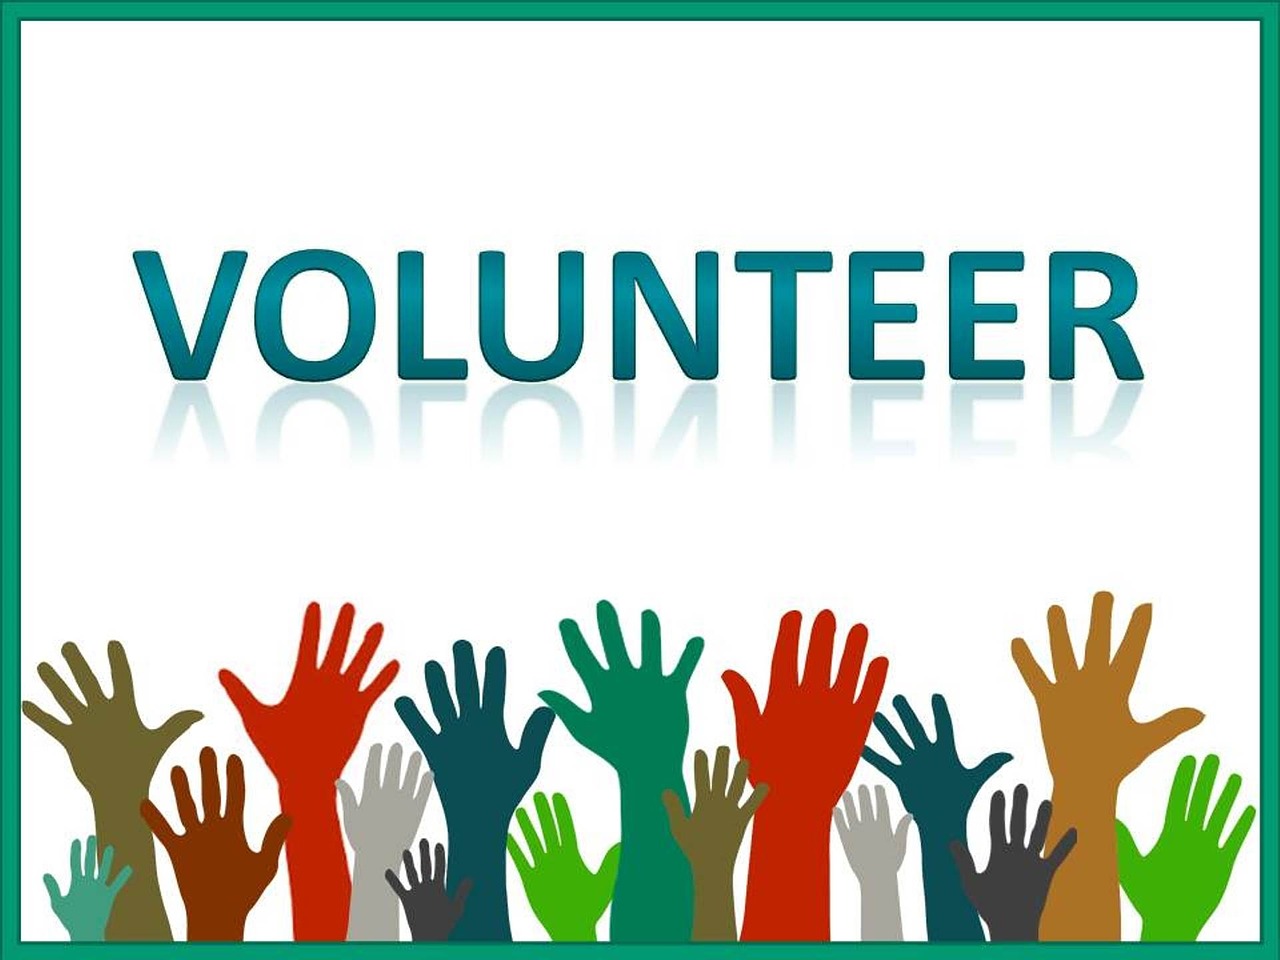 Getting Started with Volunteering: What It Is and Isn't